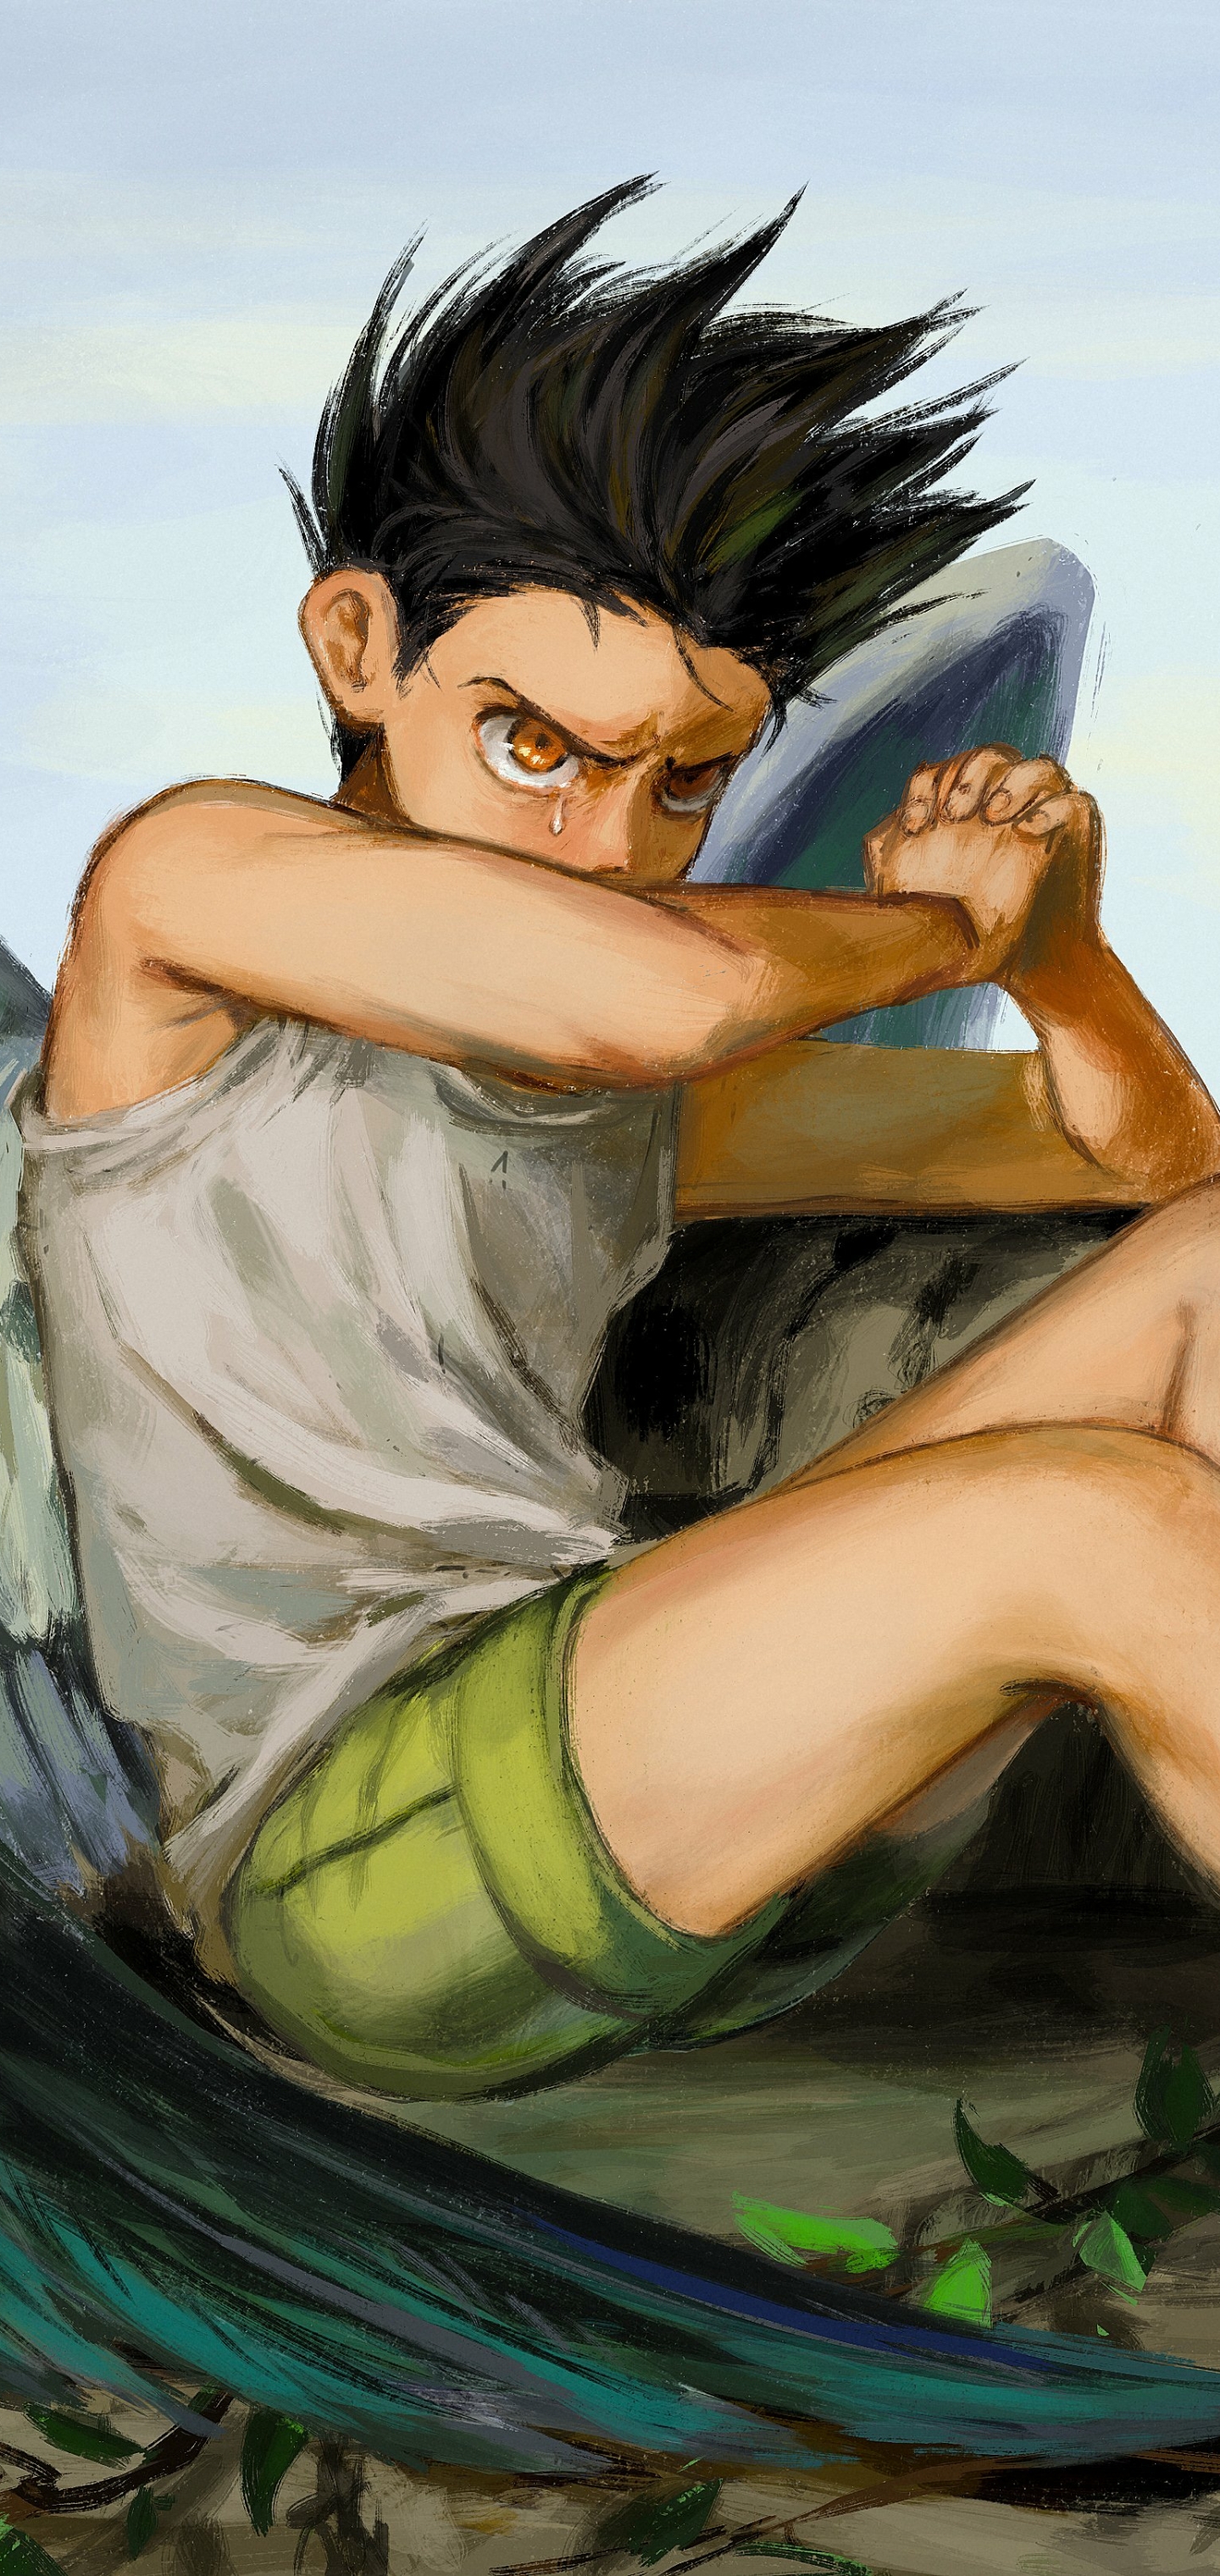 Hunter x Hunter Phone Wallpaper by 烏鴨 - Mobile Abyss